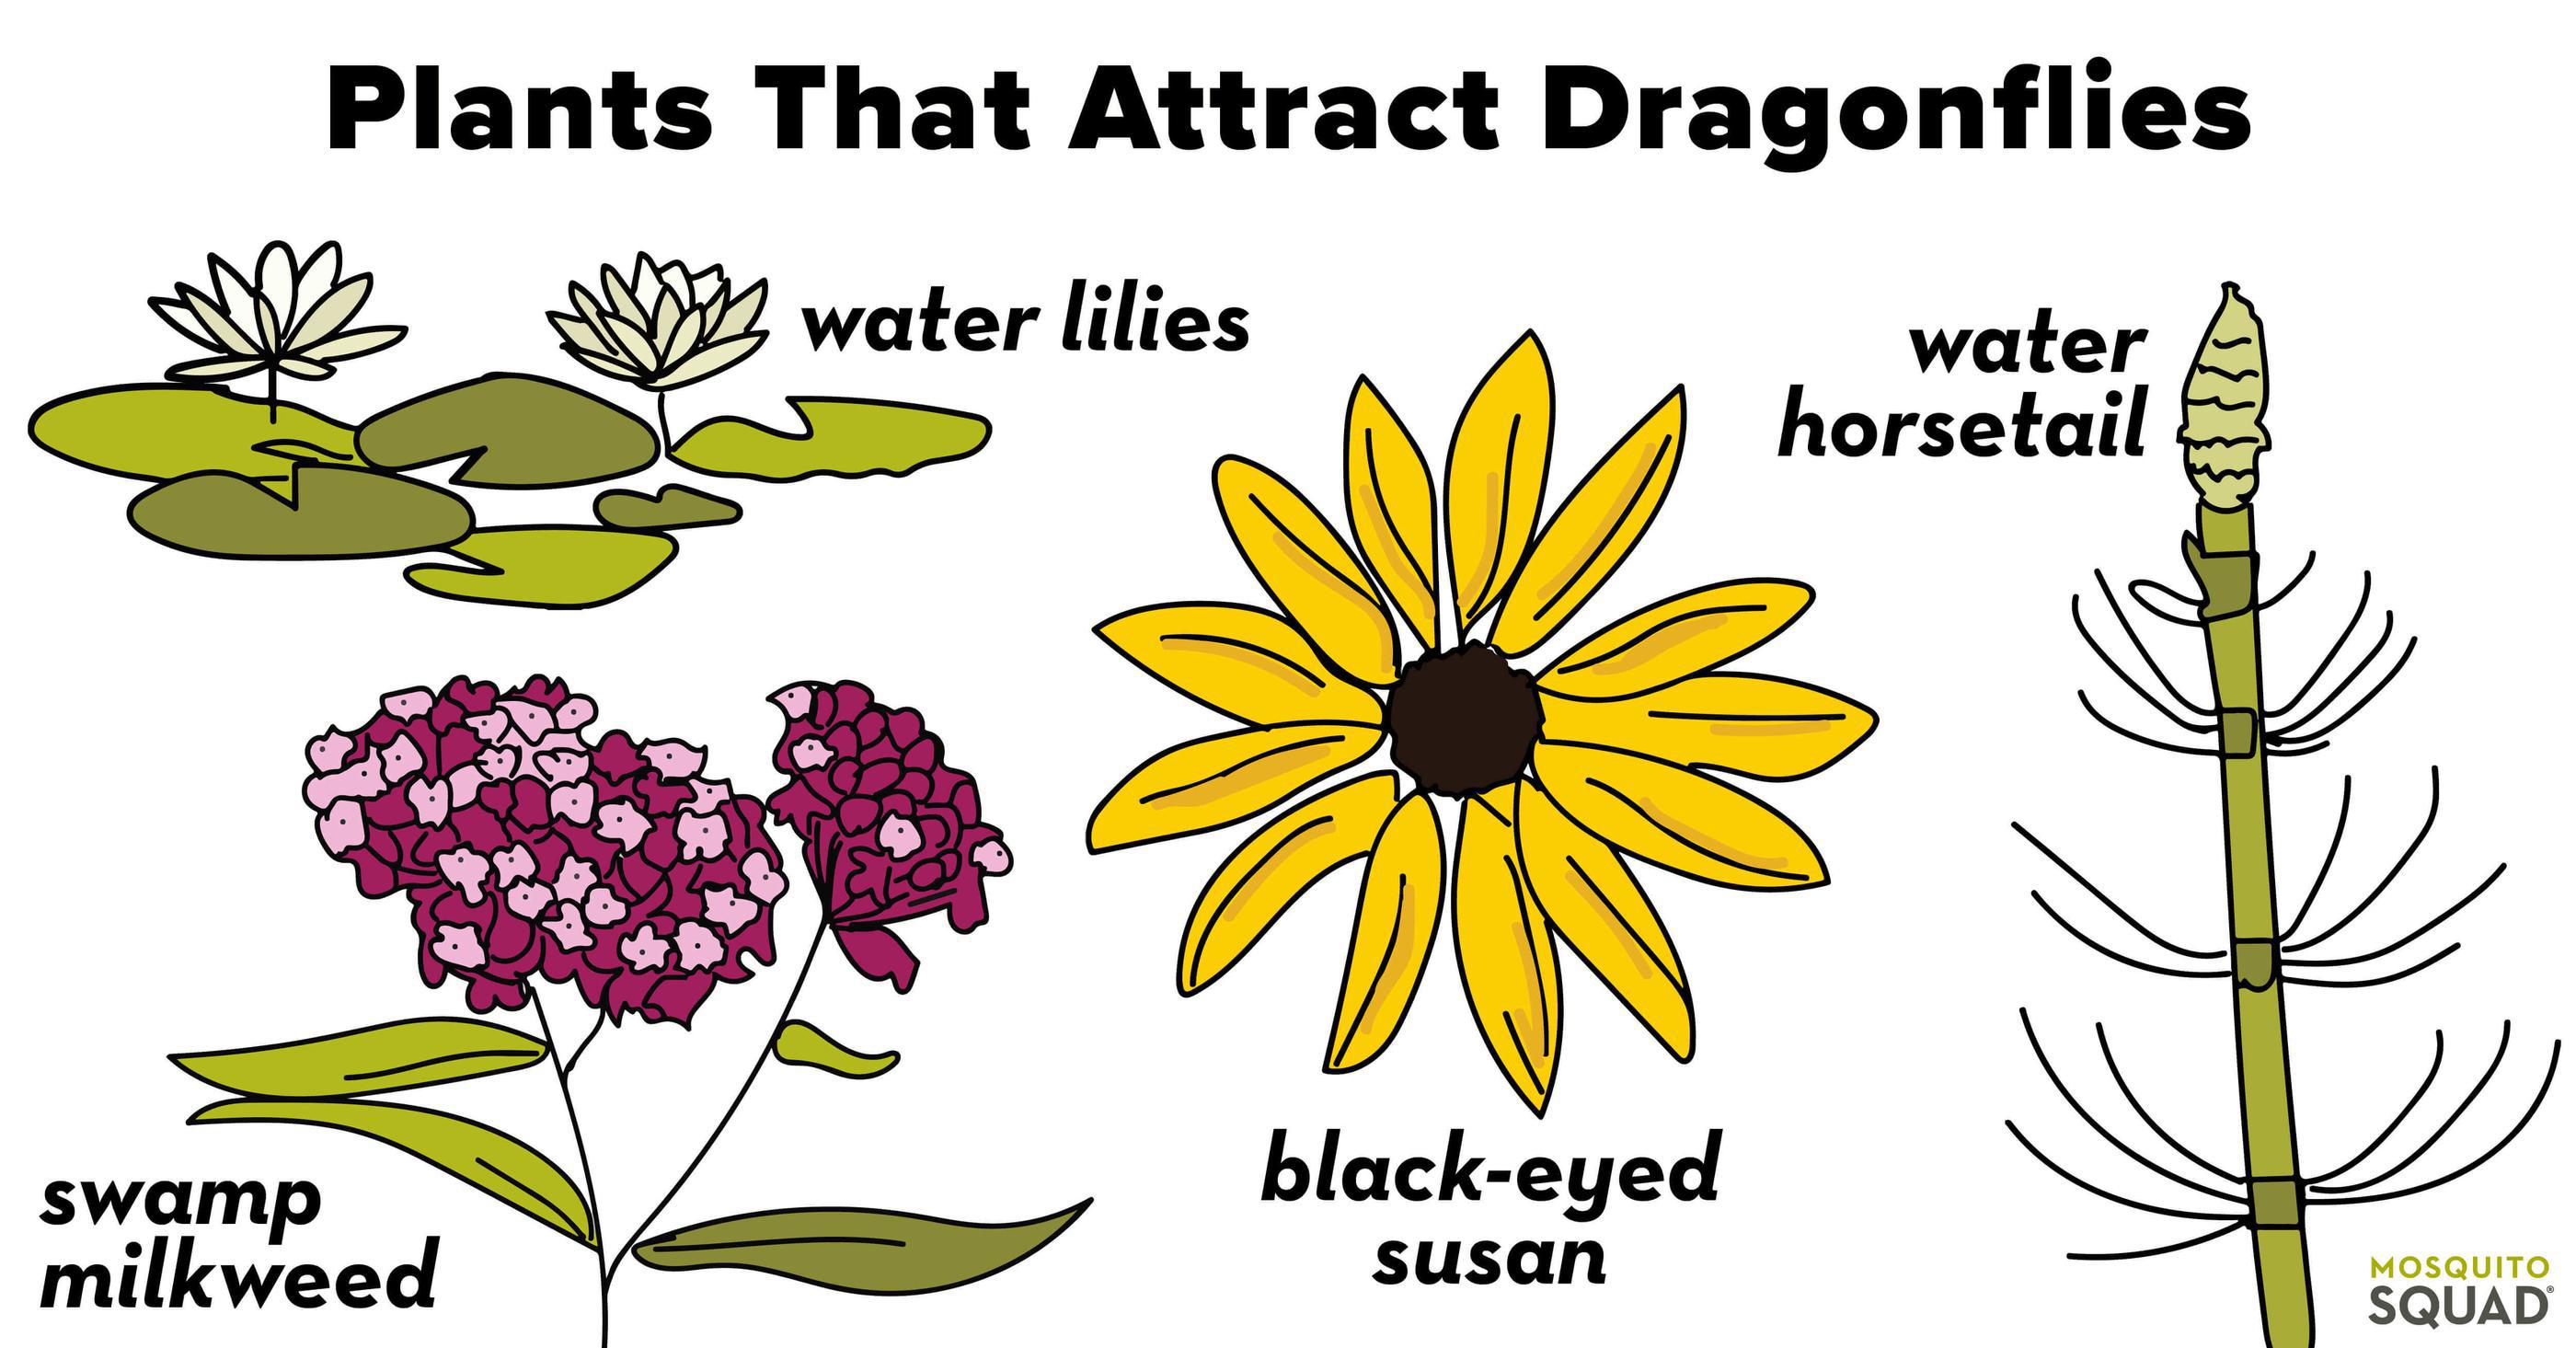 Plants that attract dragonflies